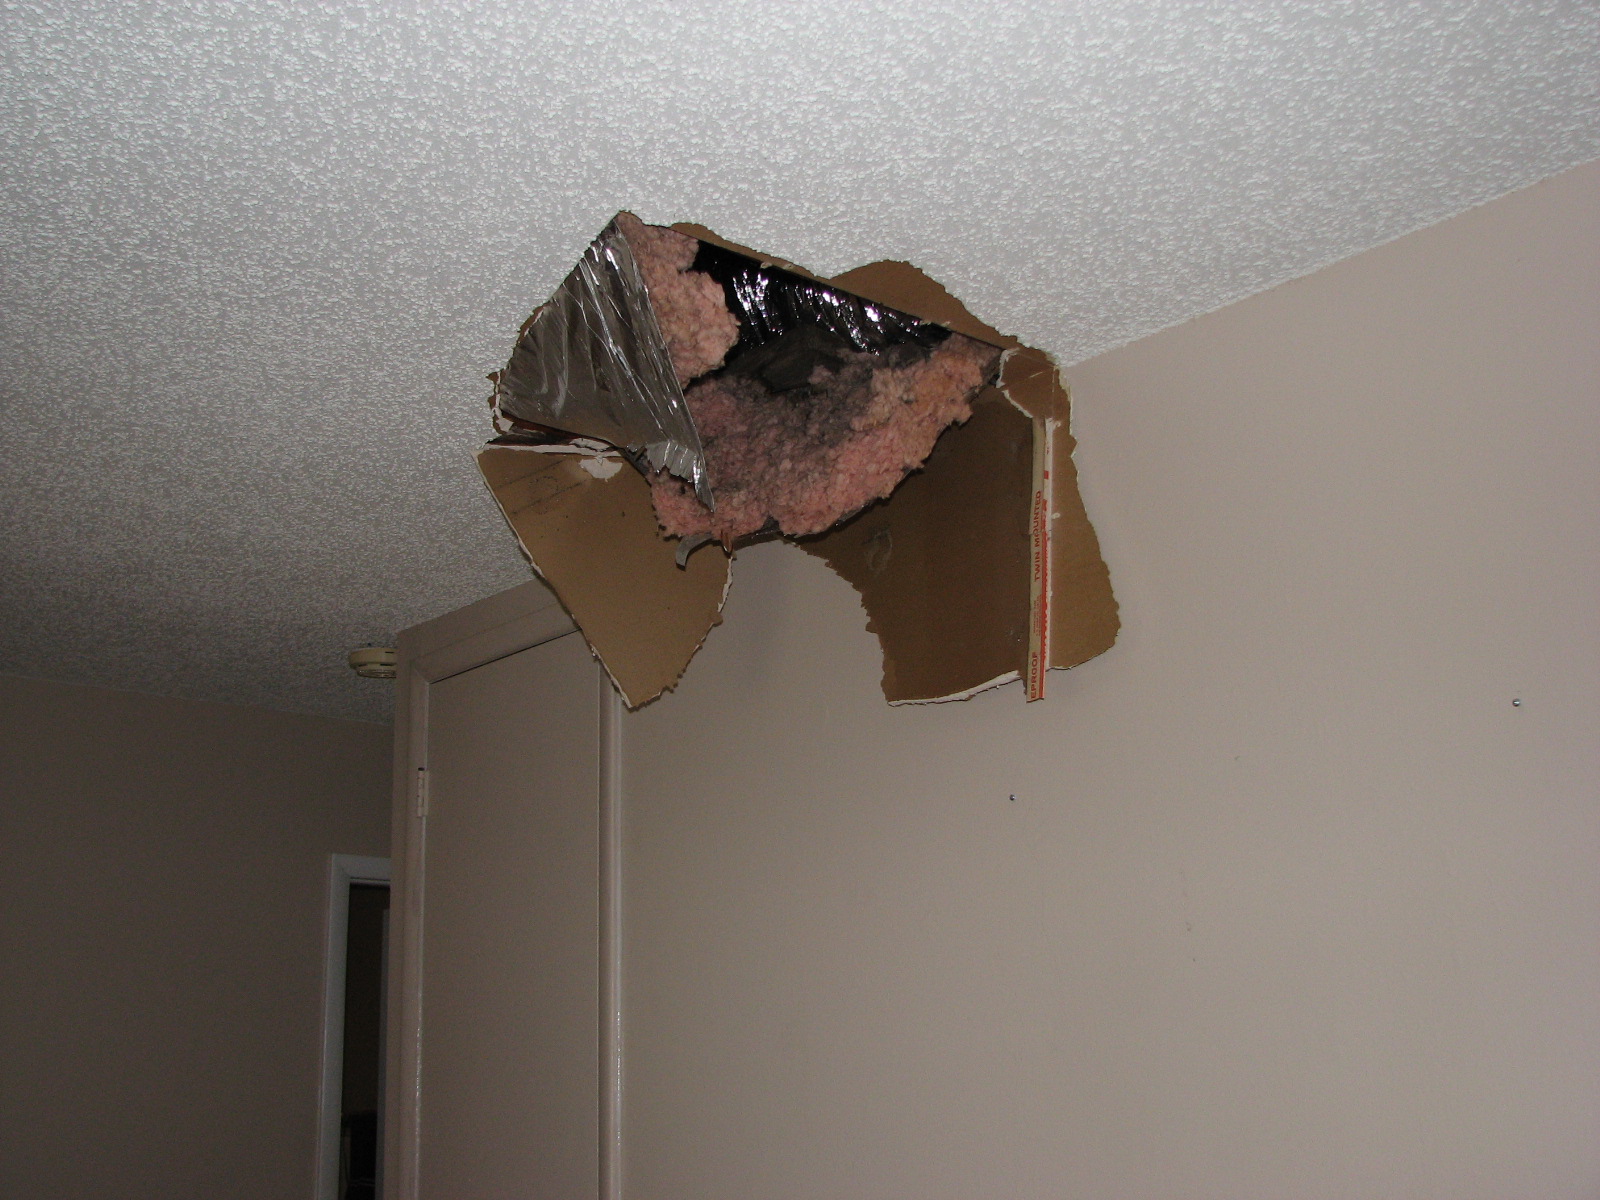 Barry The Cable Guy Stepped Thru My Popcorn Ceiling In